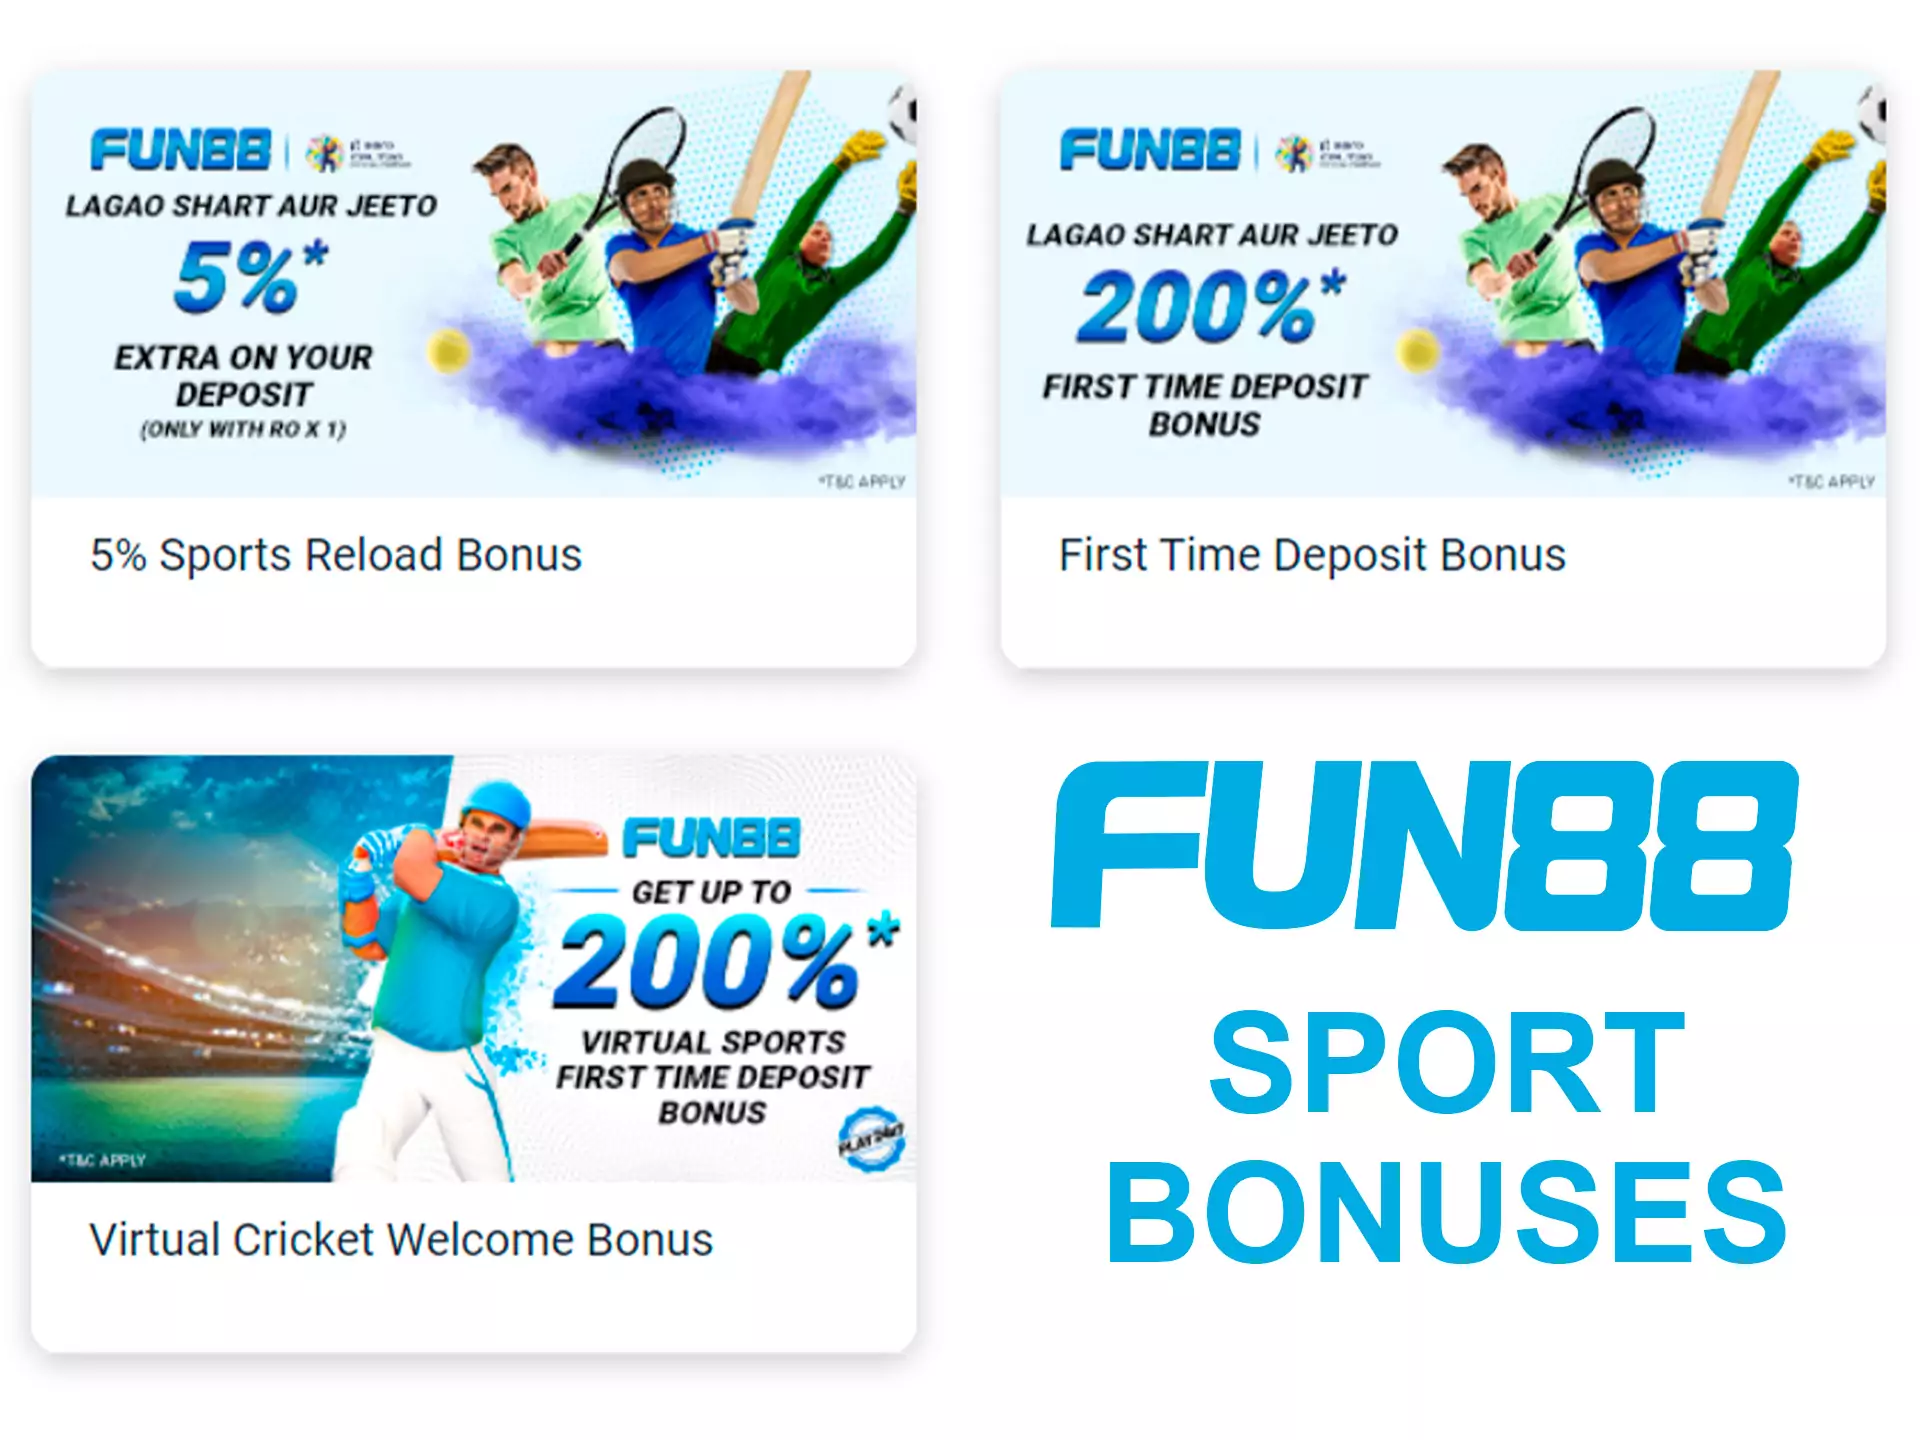 There are a lot of deposit bonuses that you can spend on sport betting at Fun88.